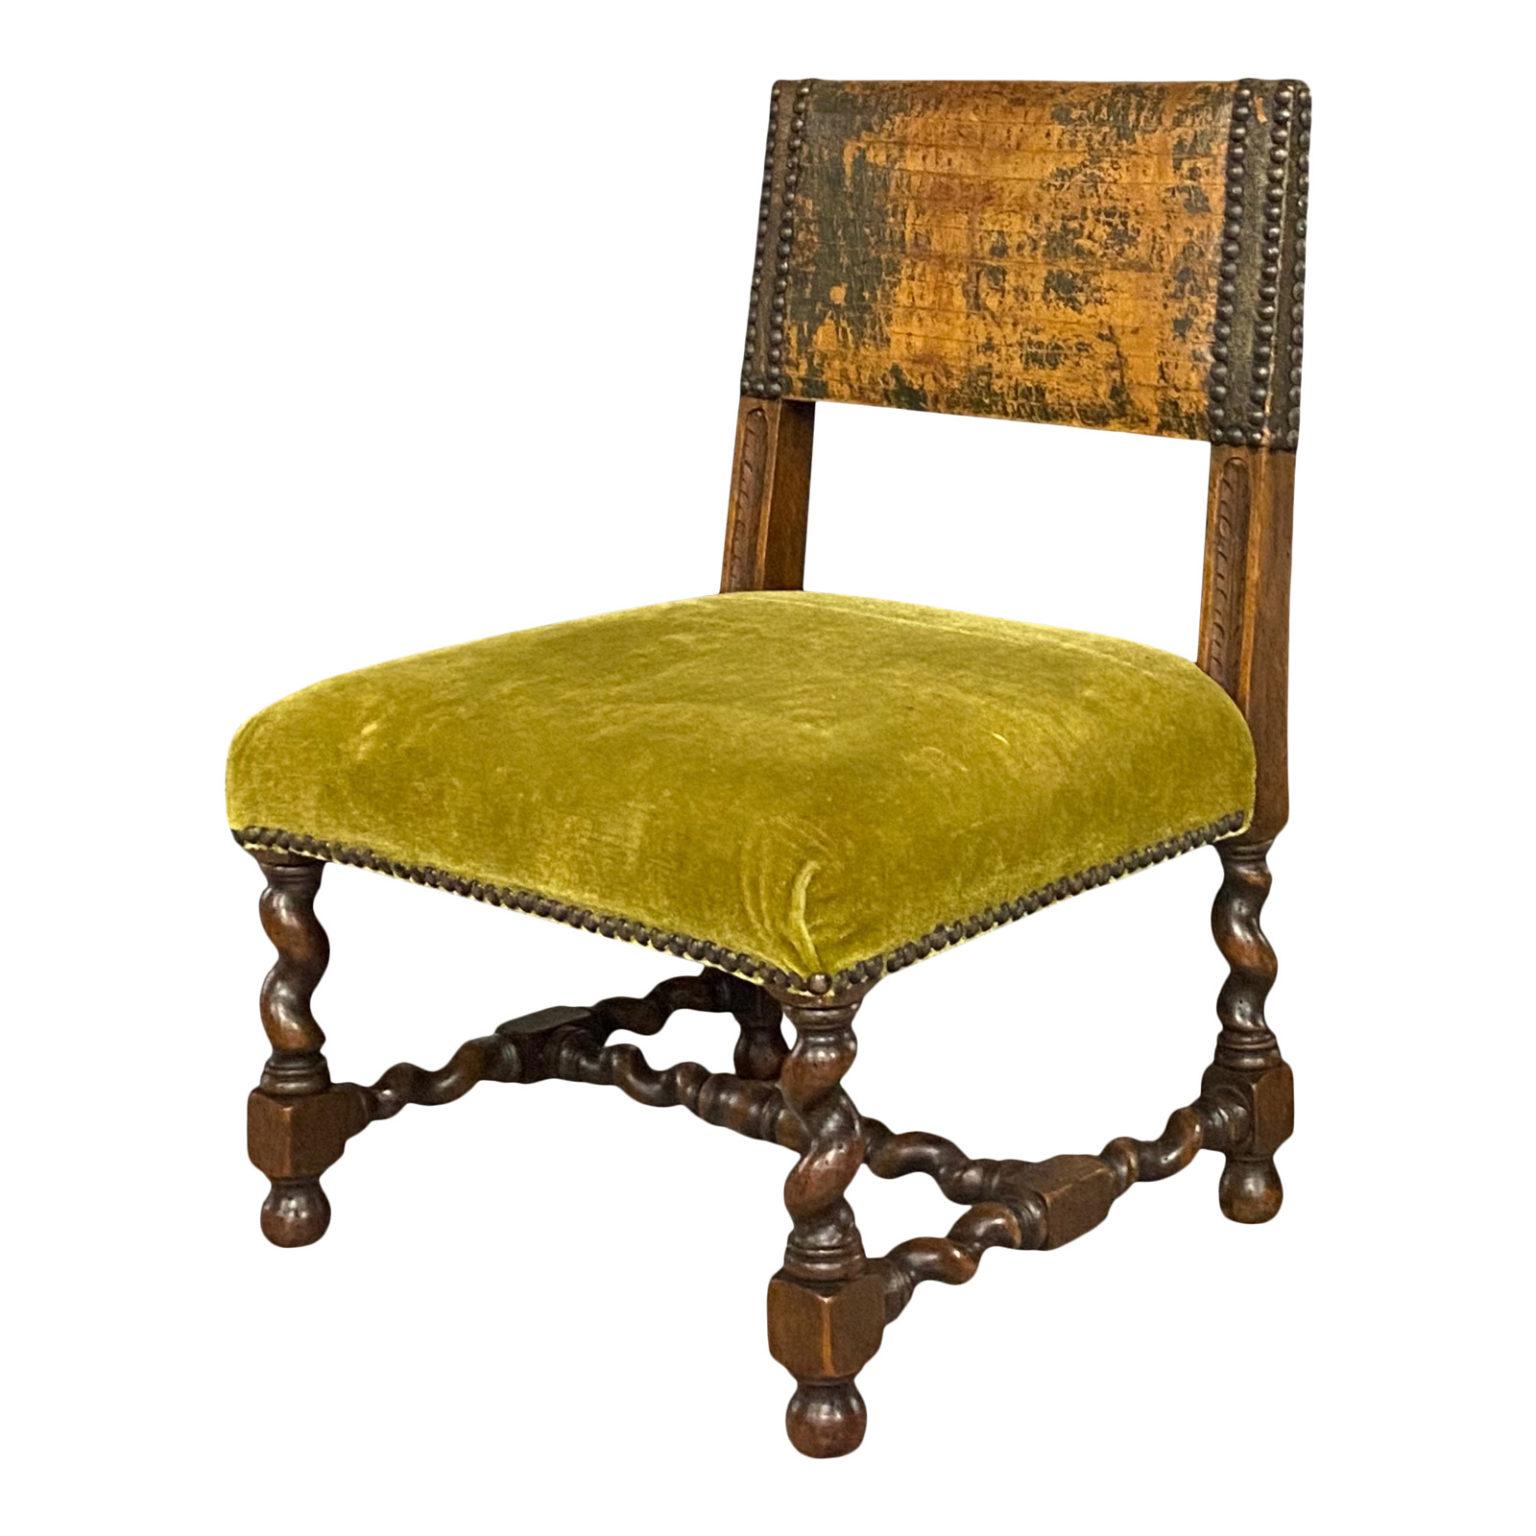 Wood 17th Century Welsh Children’s Chair Upholstered in Green Mohair and Leather